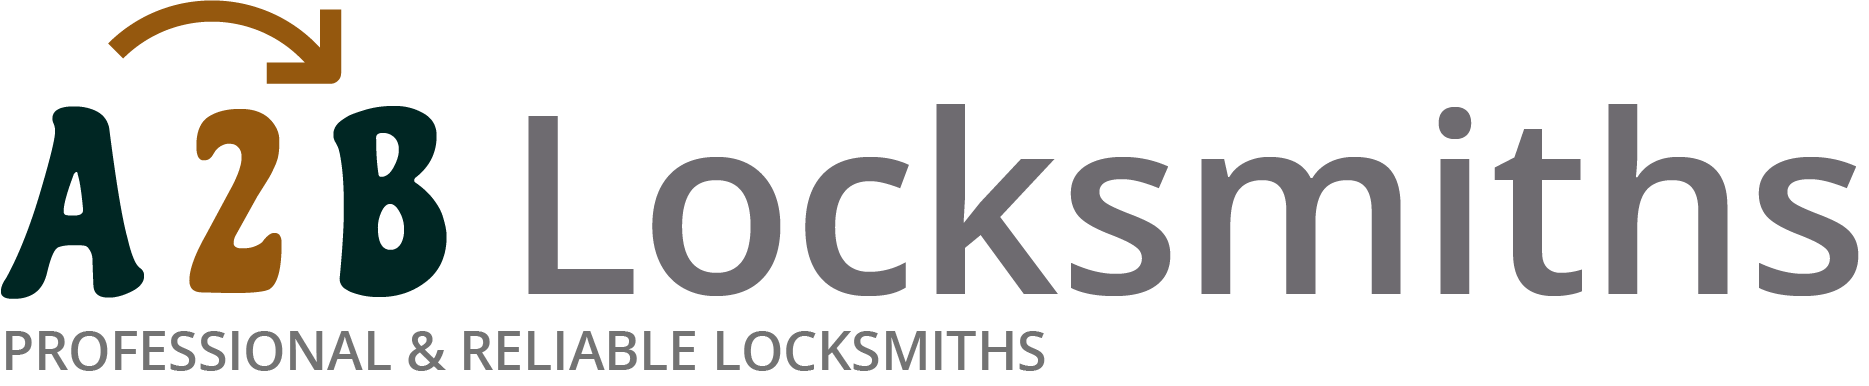 If you are locked out of house in Worthing, our 24/7 local emergency locksmith services can help you.